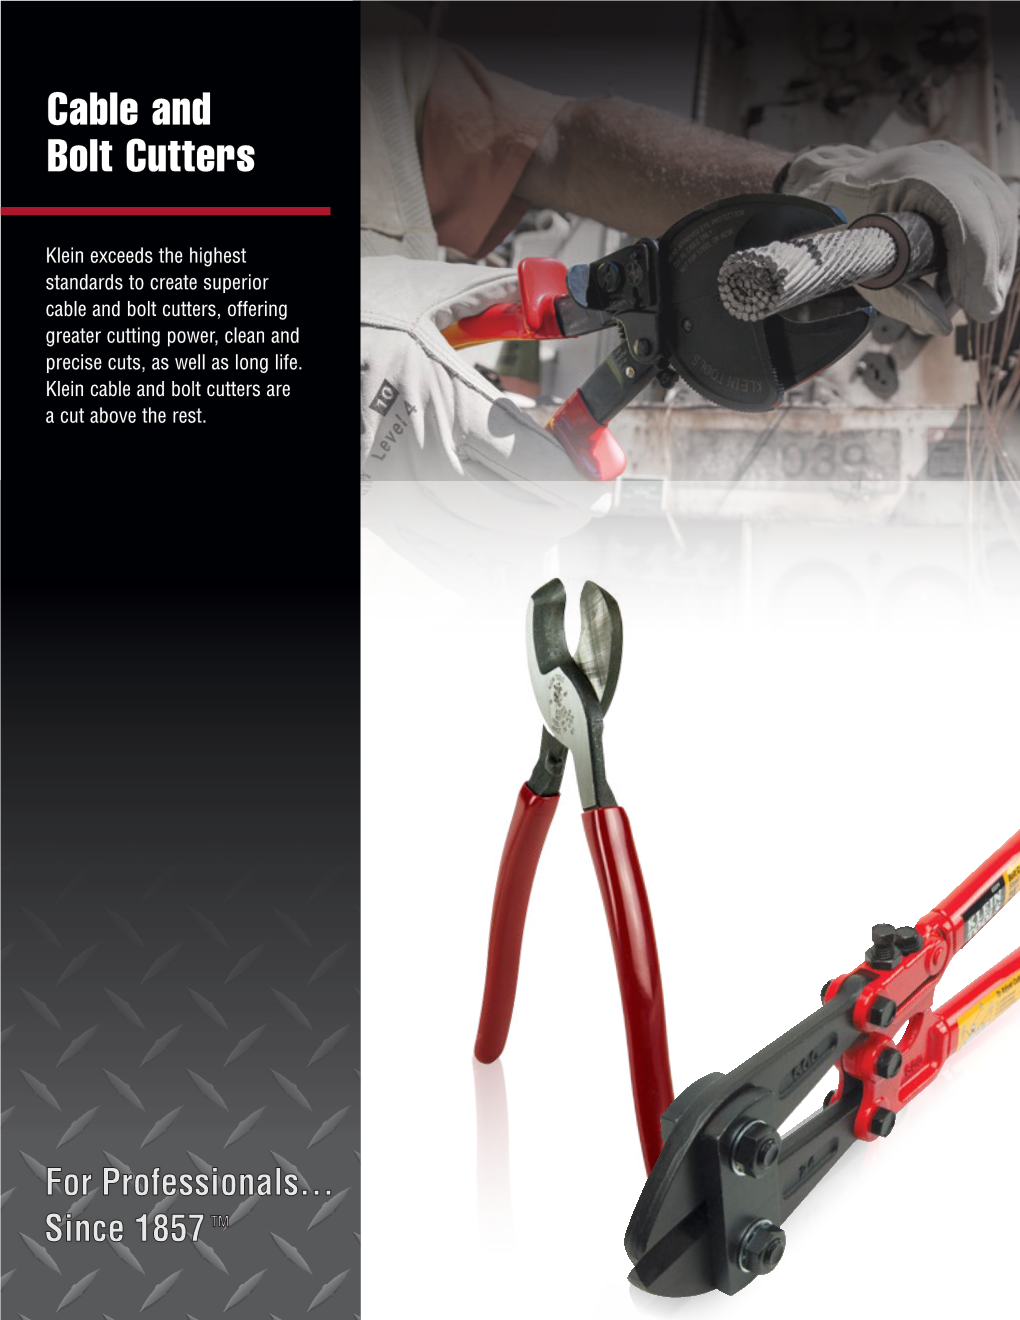 Cable & Bolt Cutters